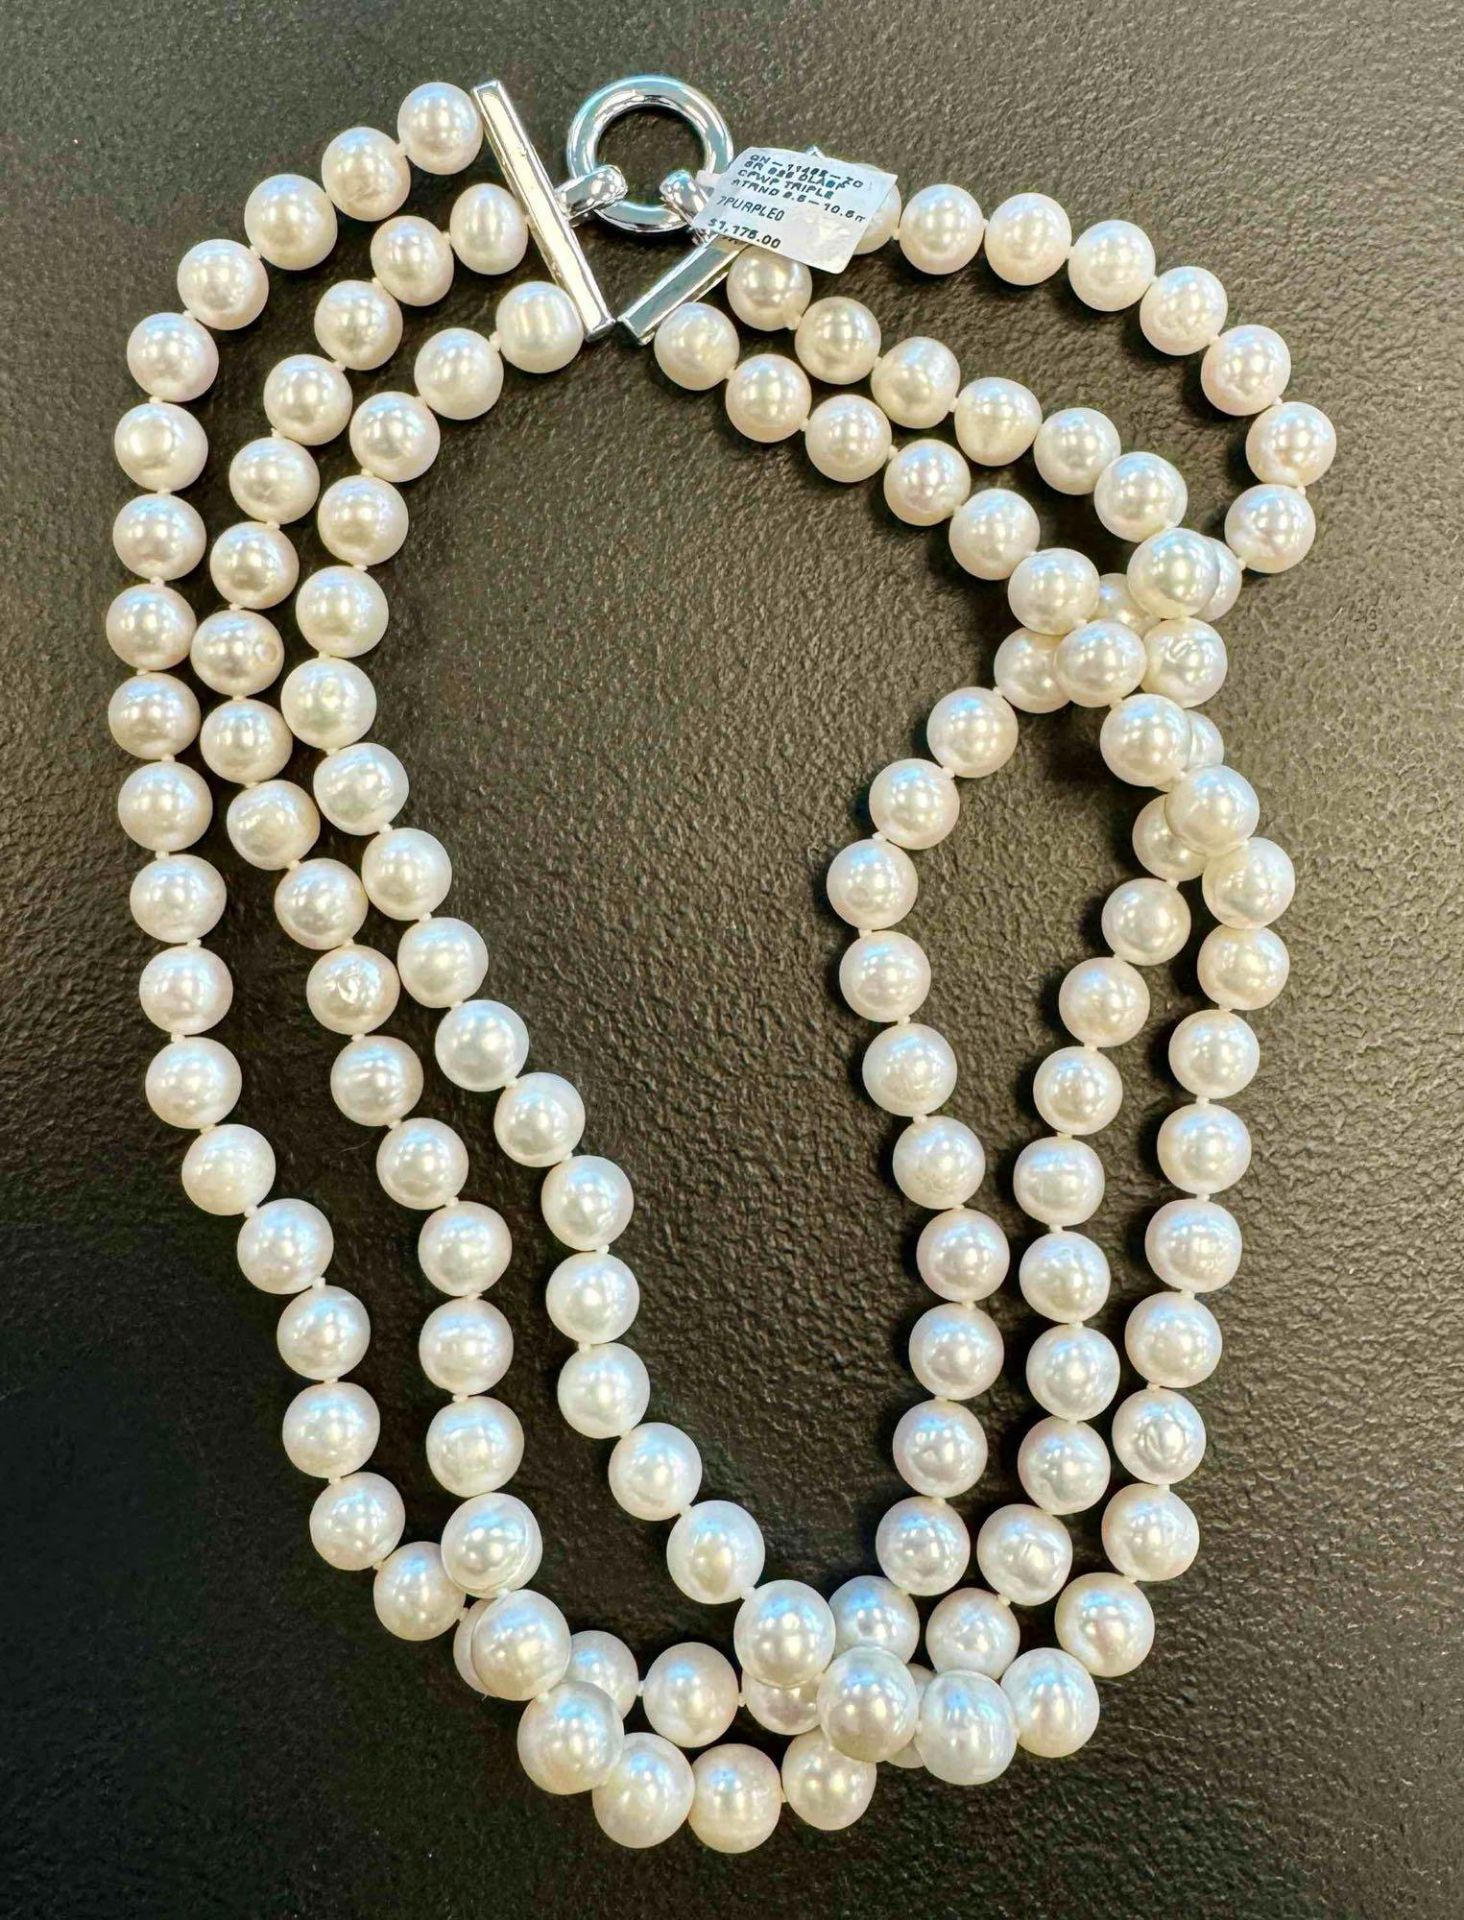 3 Strand Pearl Necklaces $1200 Retail